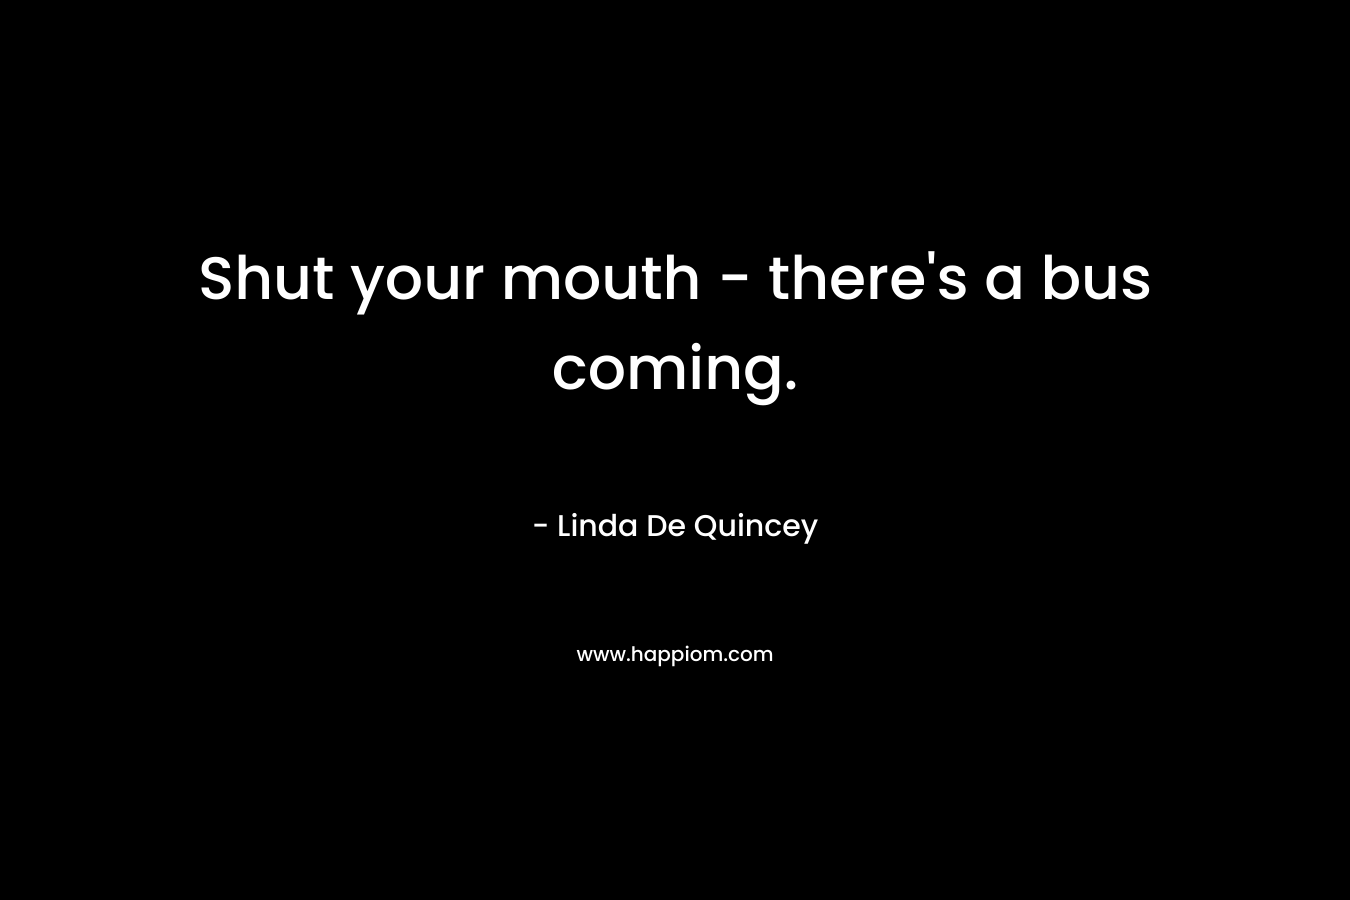 Shut your mouth – there’s a bus coming. – Linda De Quincey